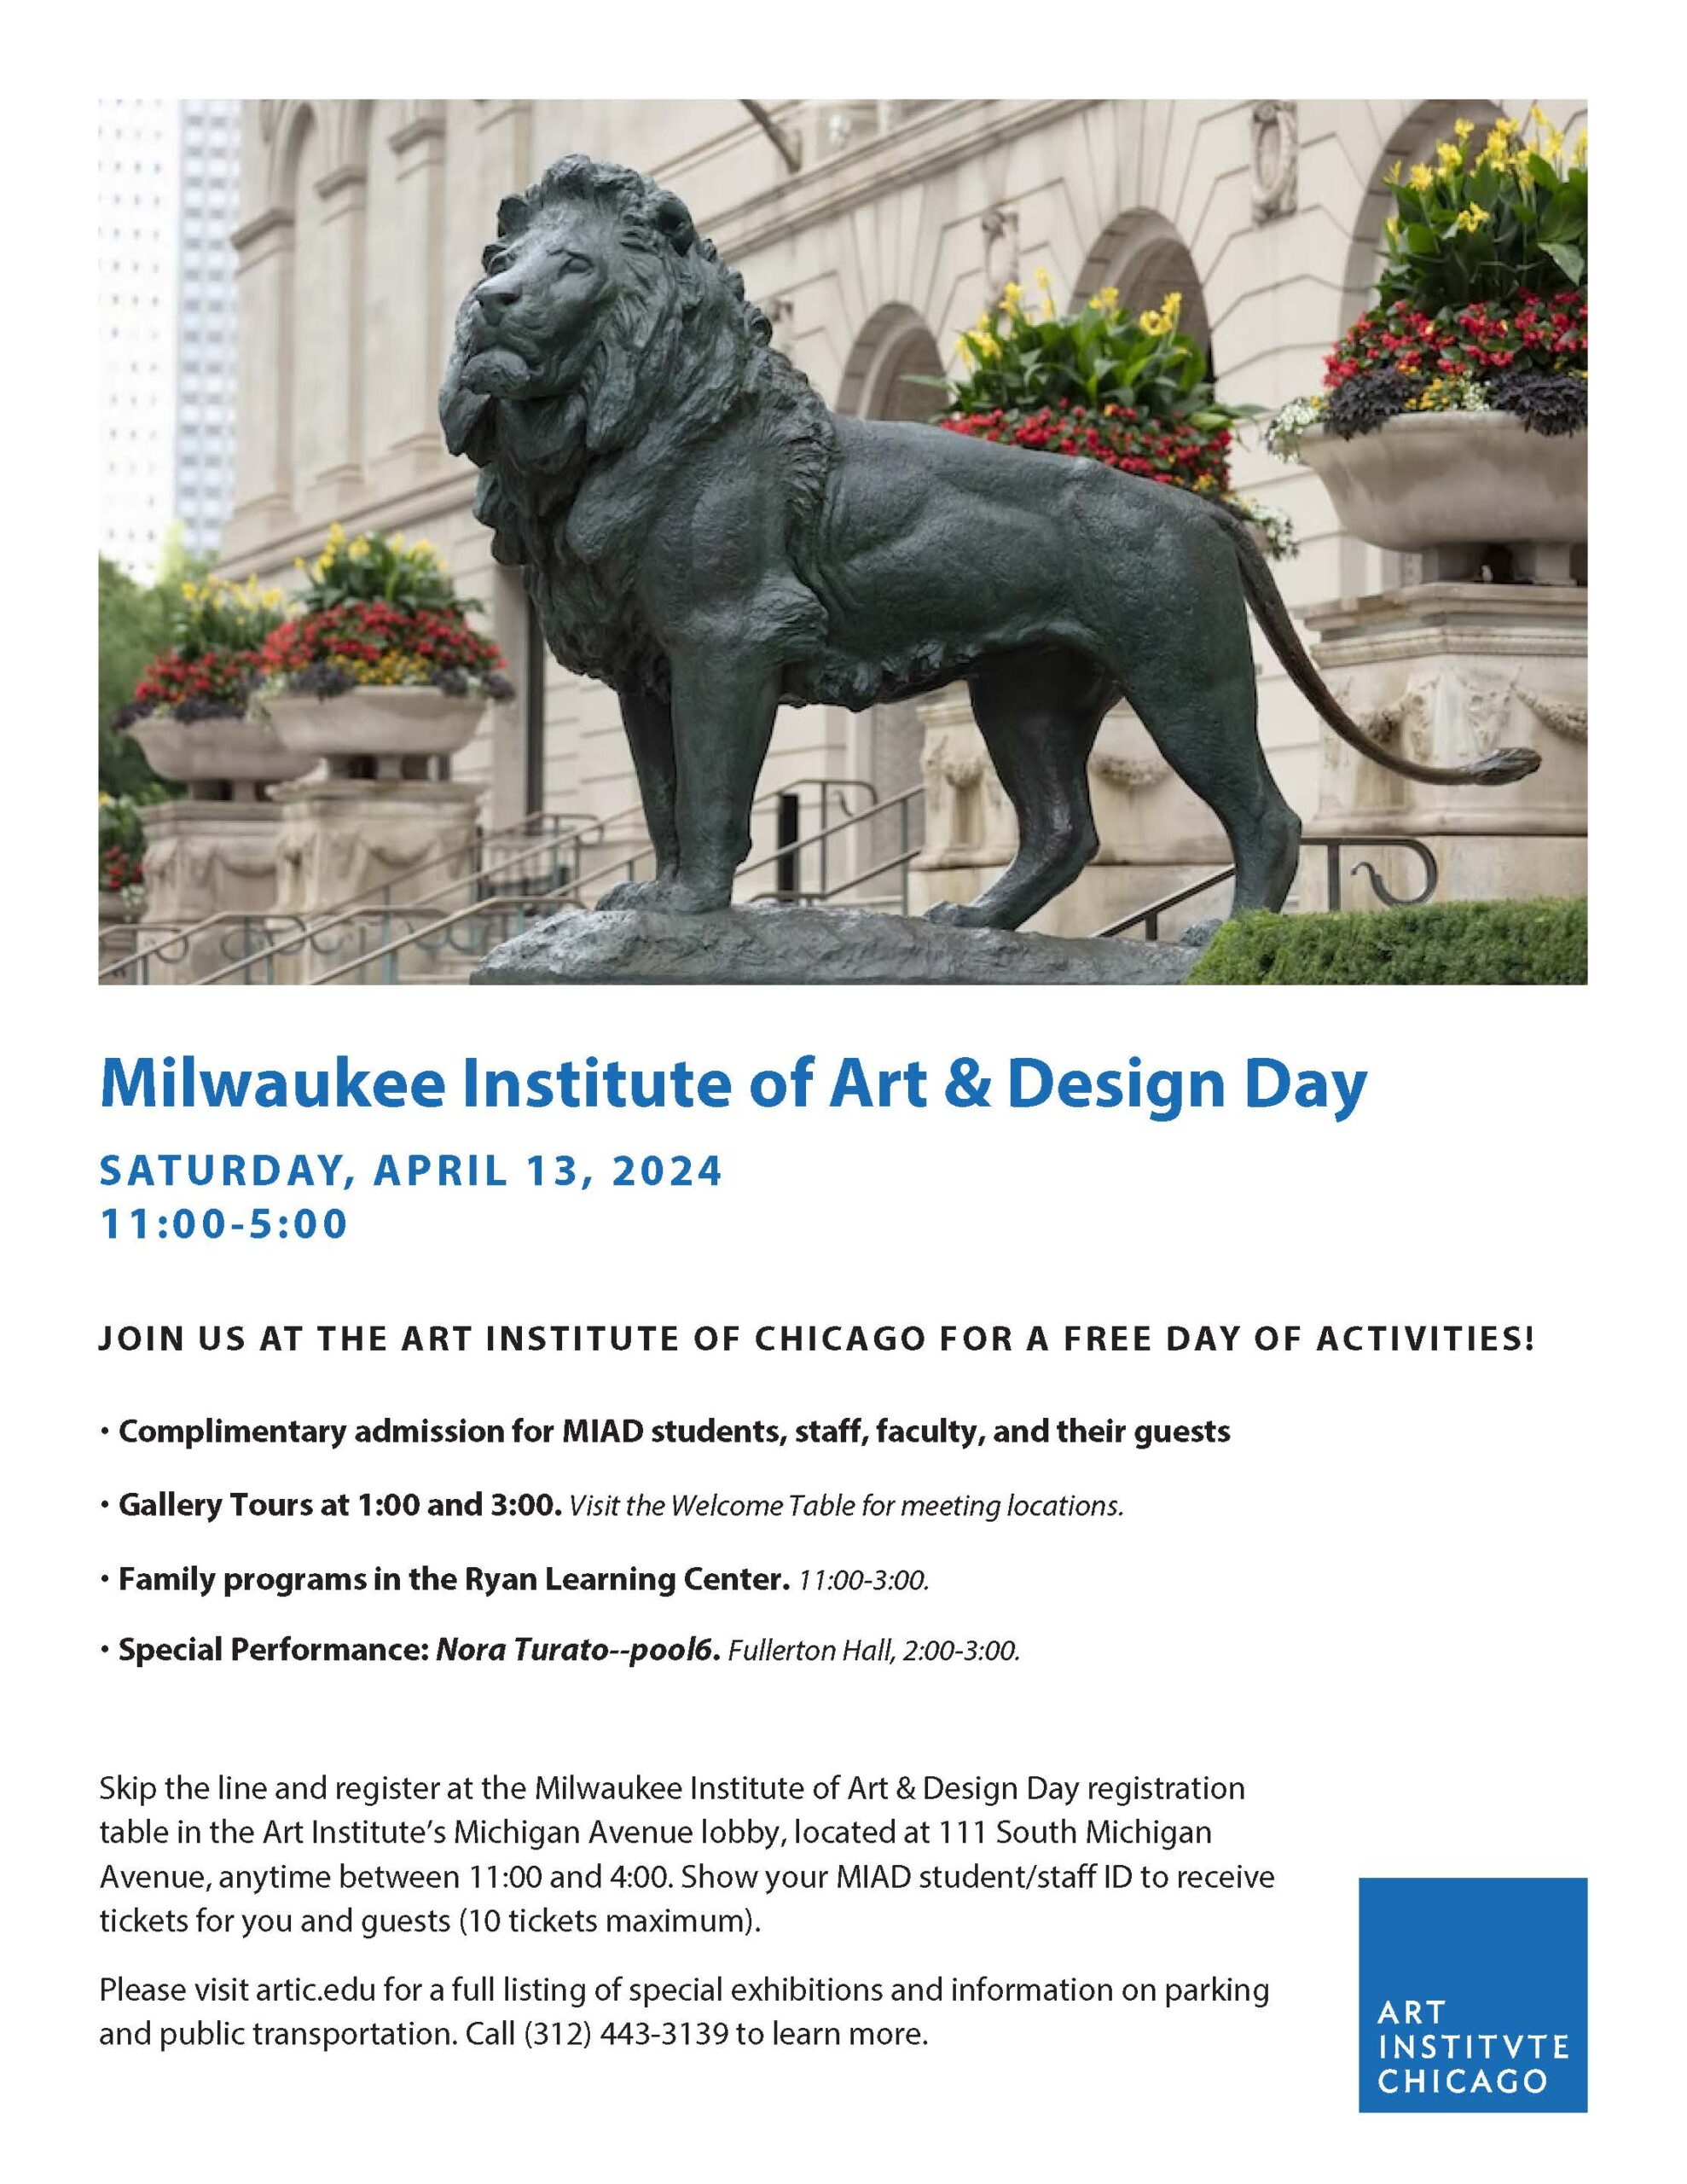 MIAD Day at the Art Institute Chicago! April 13